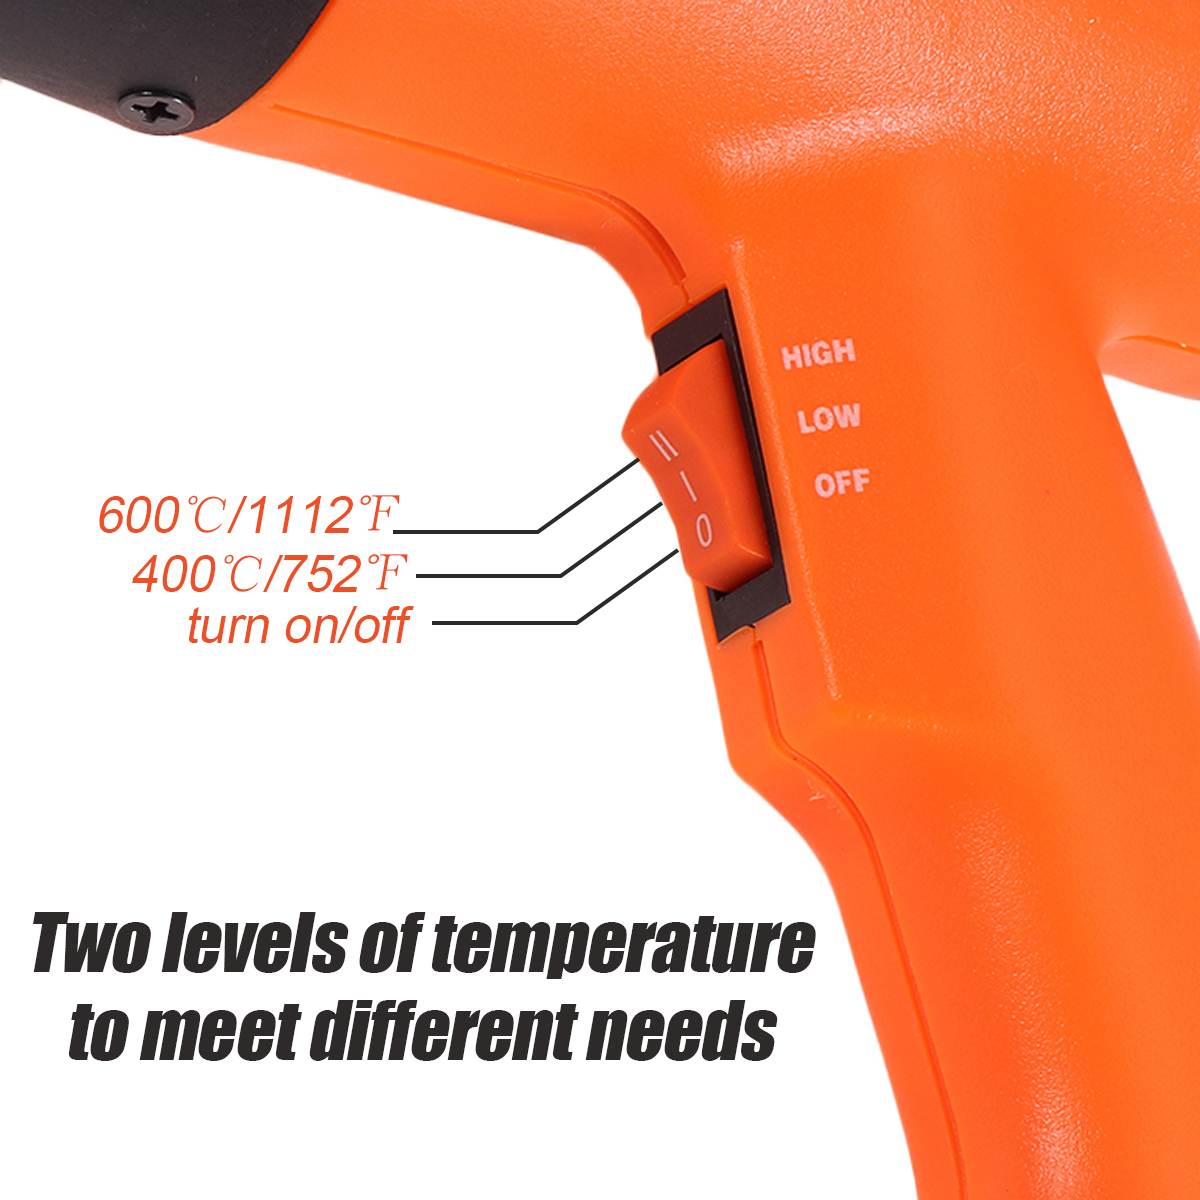 220V-2000W-Electric-Hot-Air-Heater-Heating-Tool-Shrink-Wrapping-Thermal-Power-Tool-1784452-10